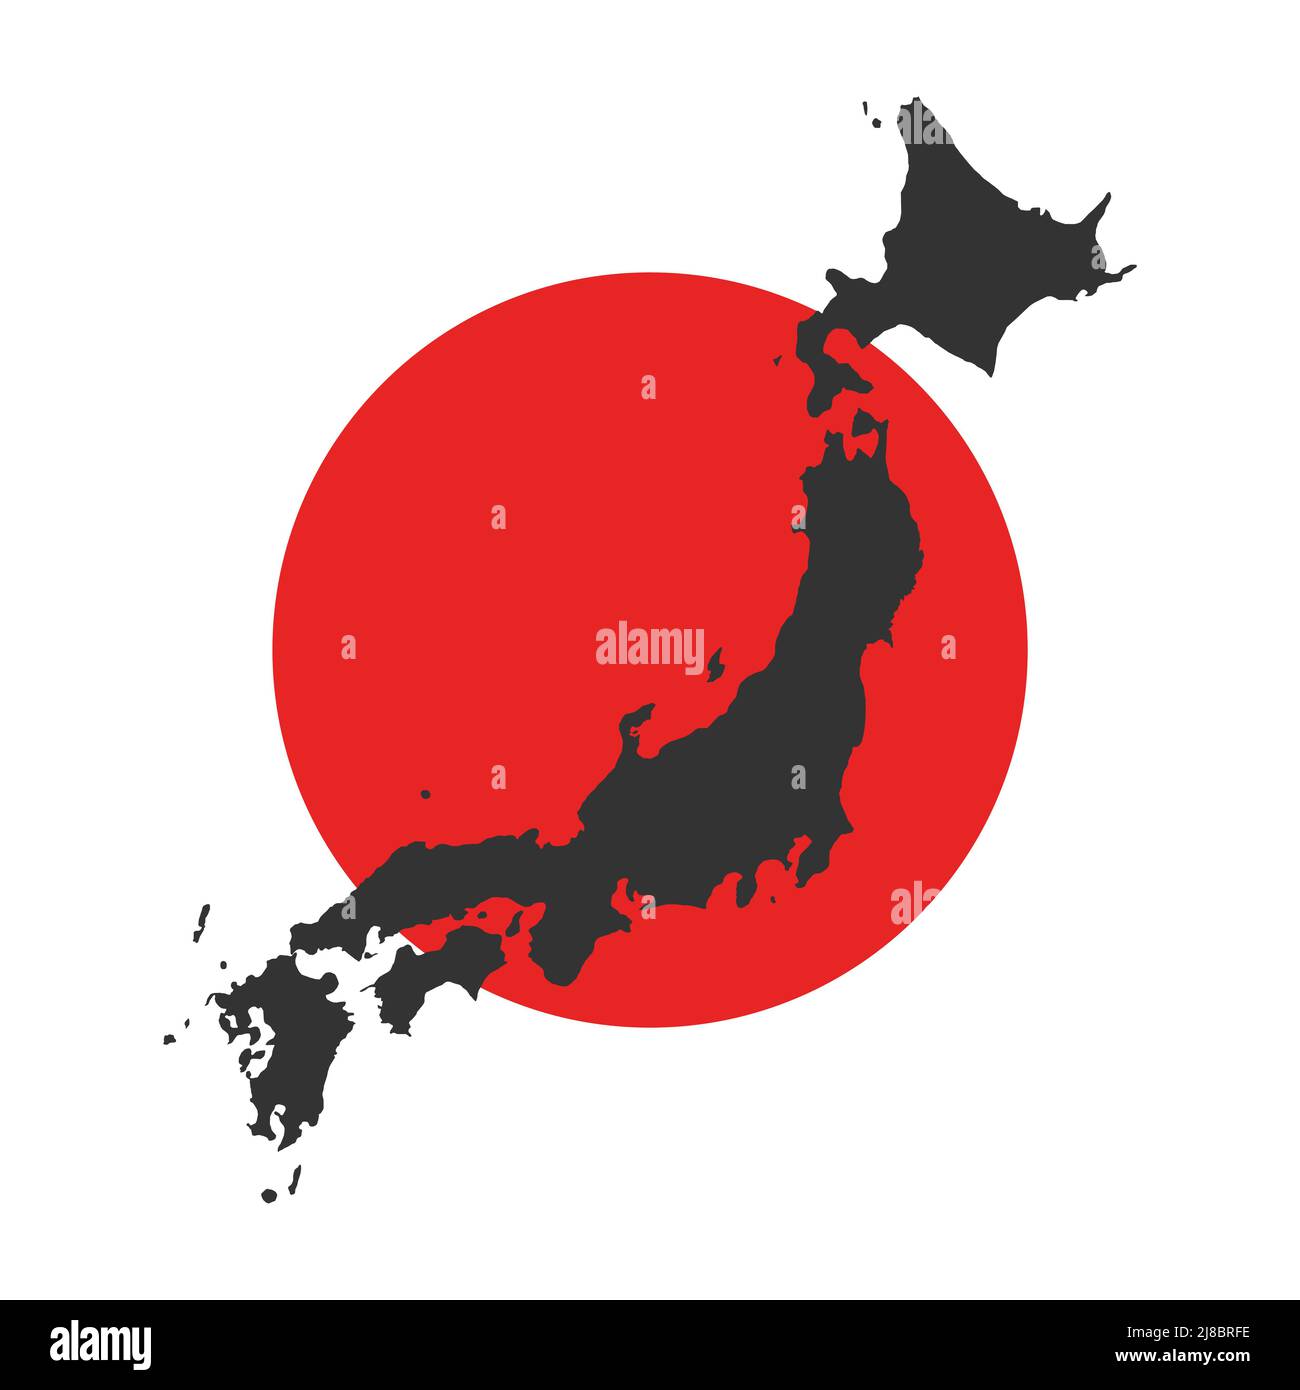 Japan black map and flag vector concept Stock Vector